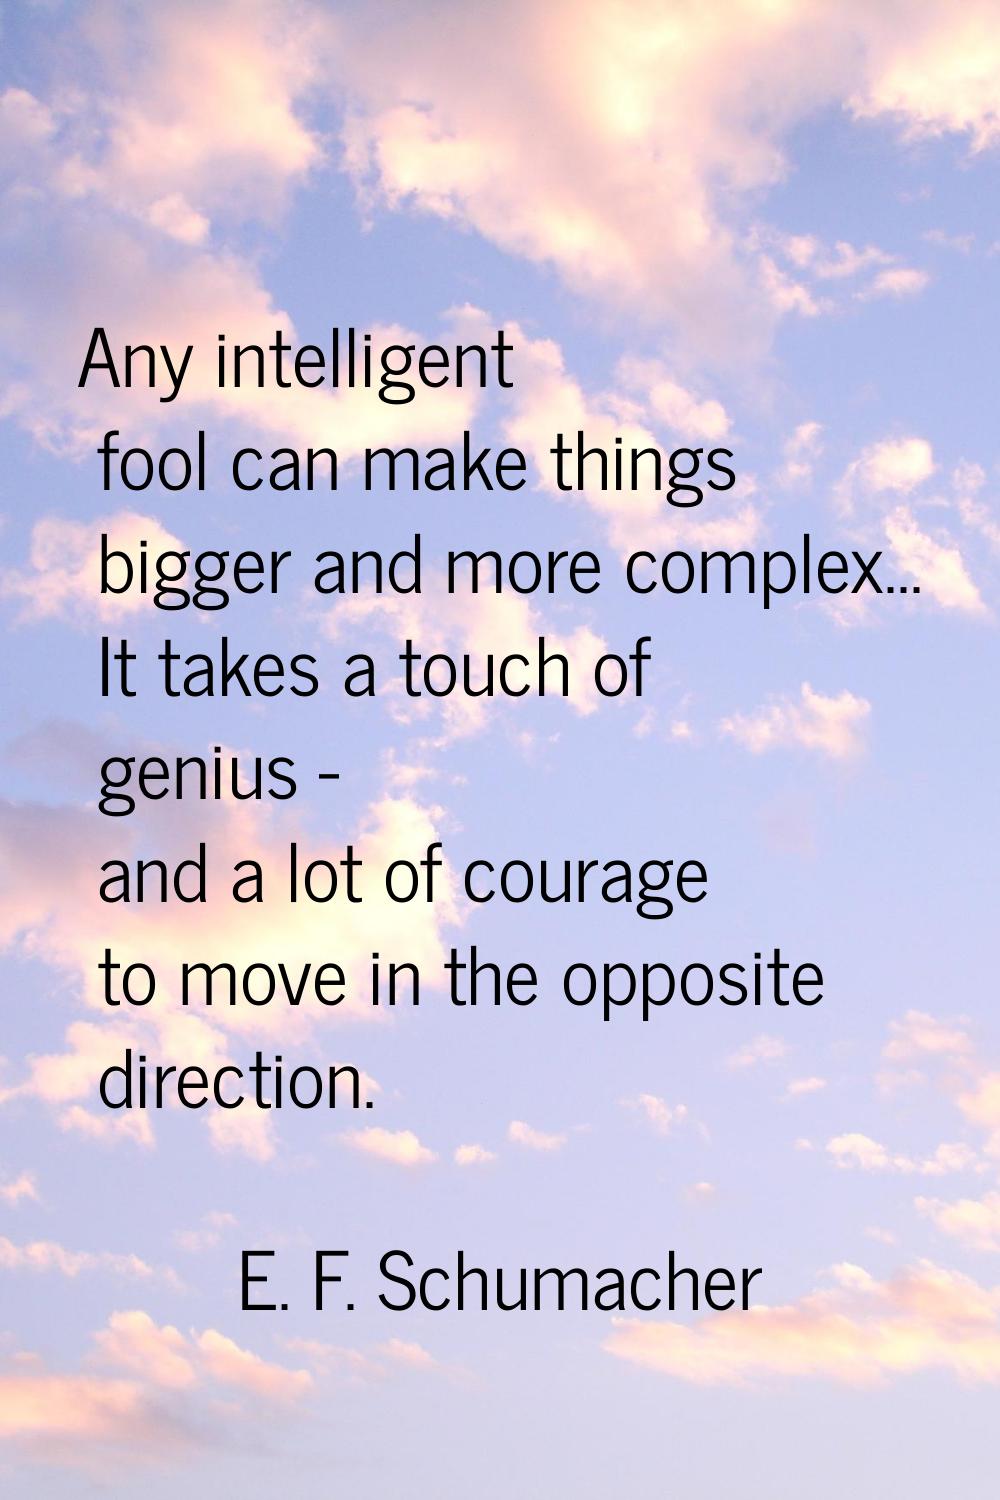 Any intelligent fool can make things bigger and more complex... It takes a touch of genius - and a 